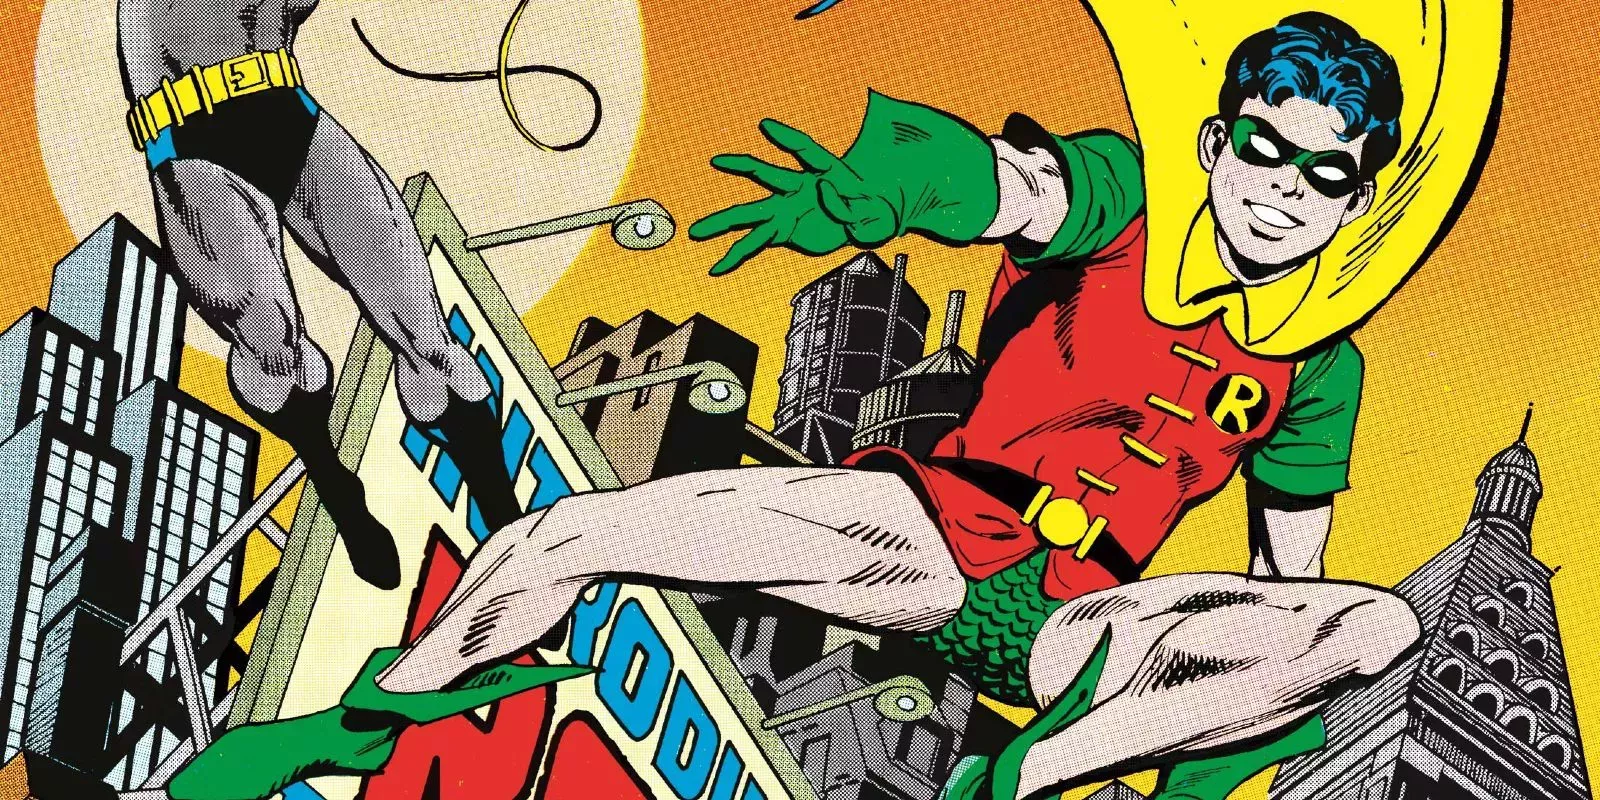 A remastered Ed Hannigan cover has Batman and Robin move through the streets of Gotham